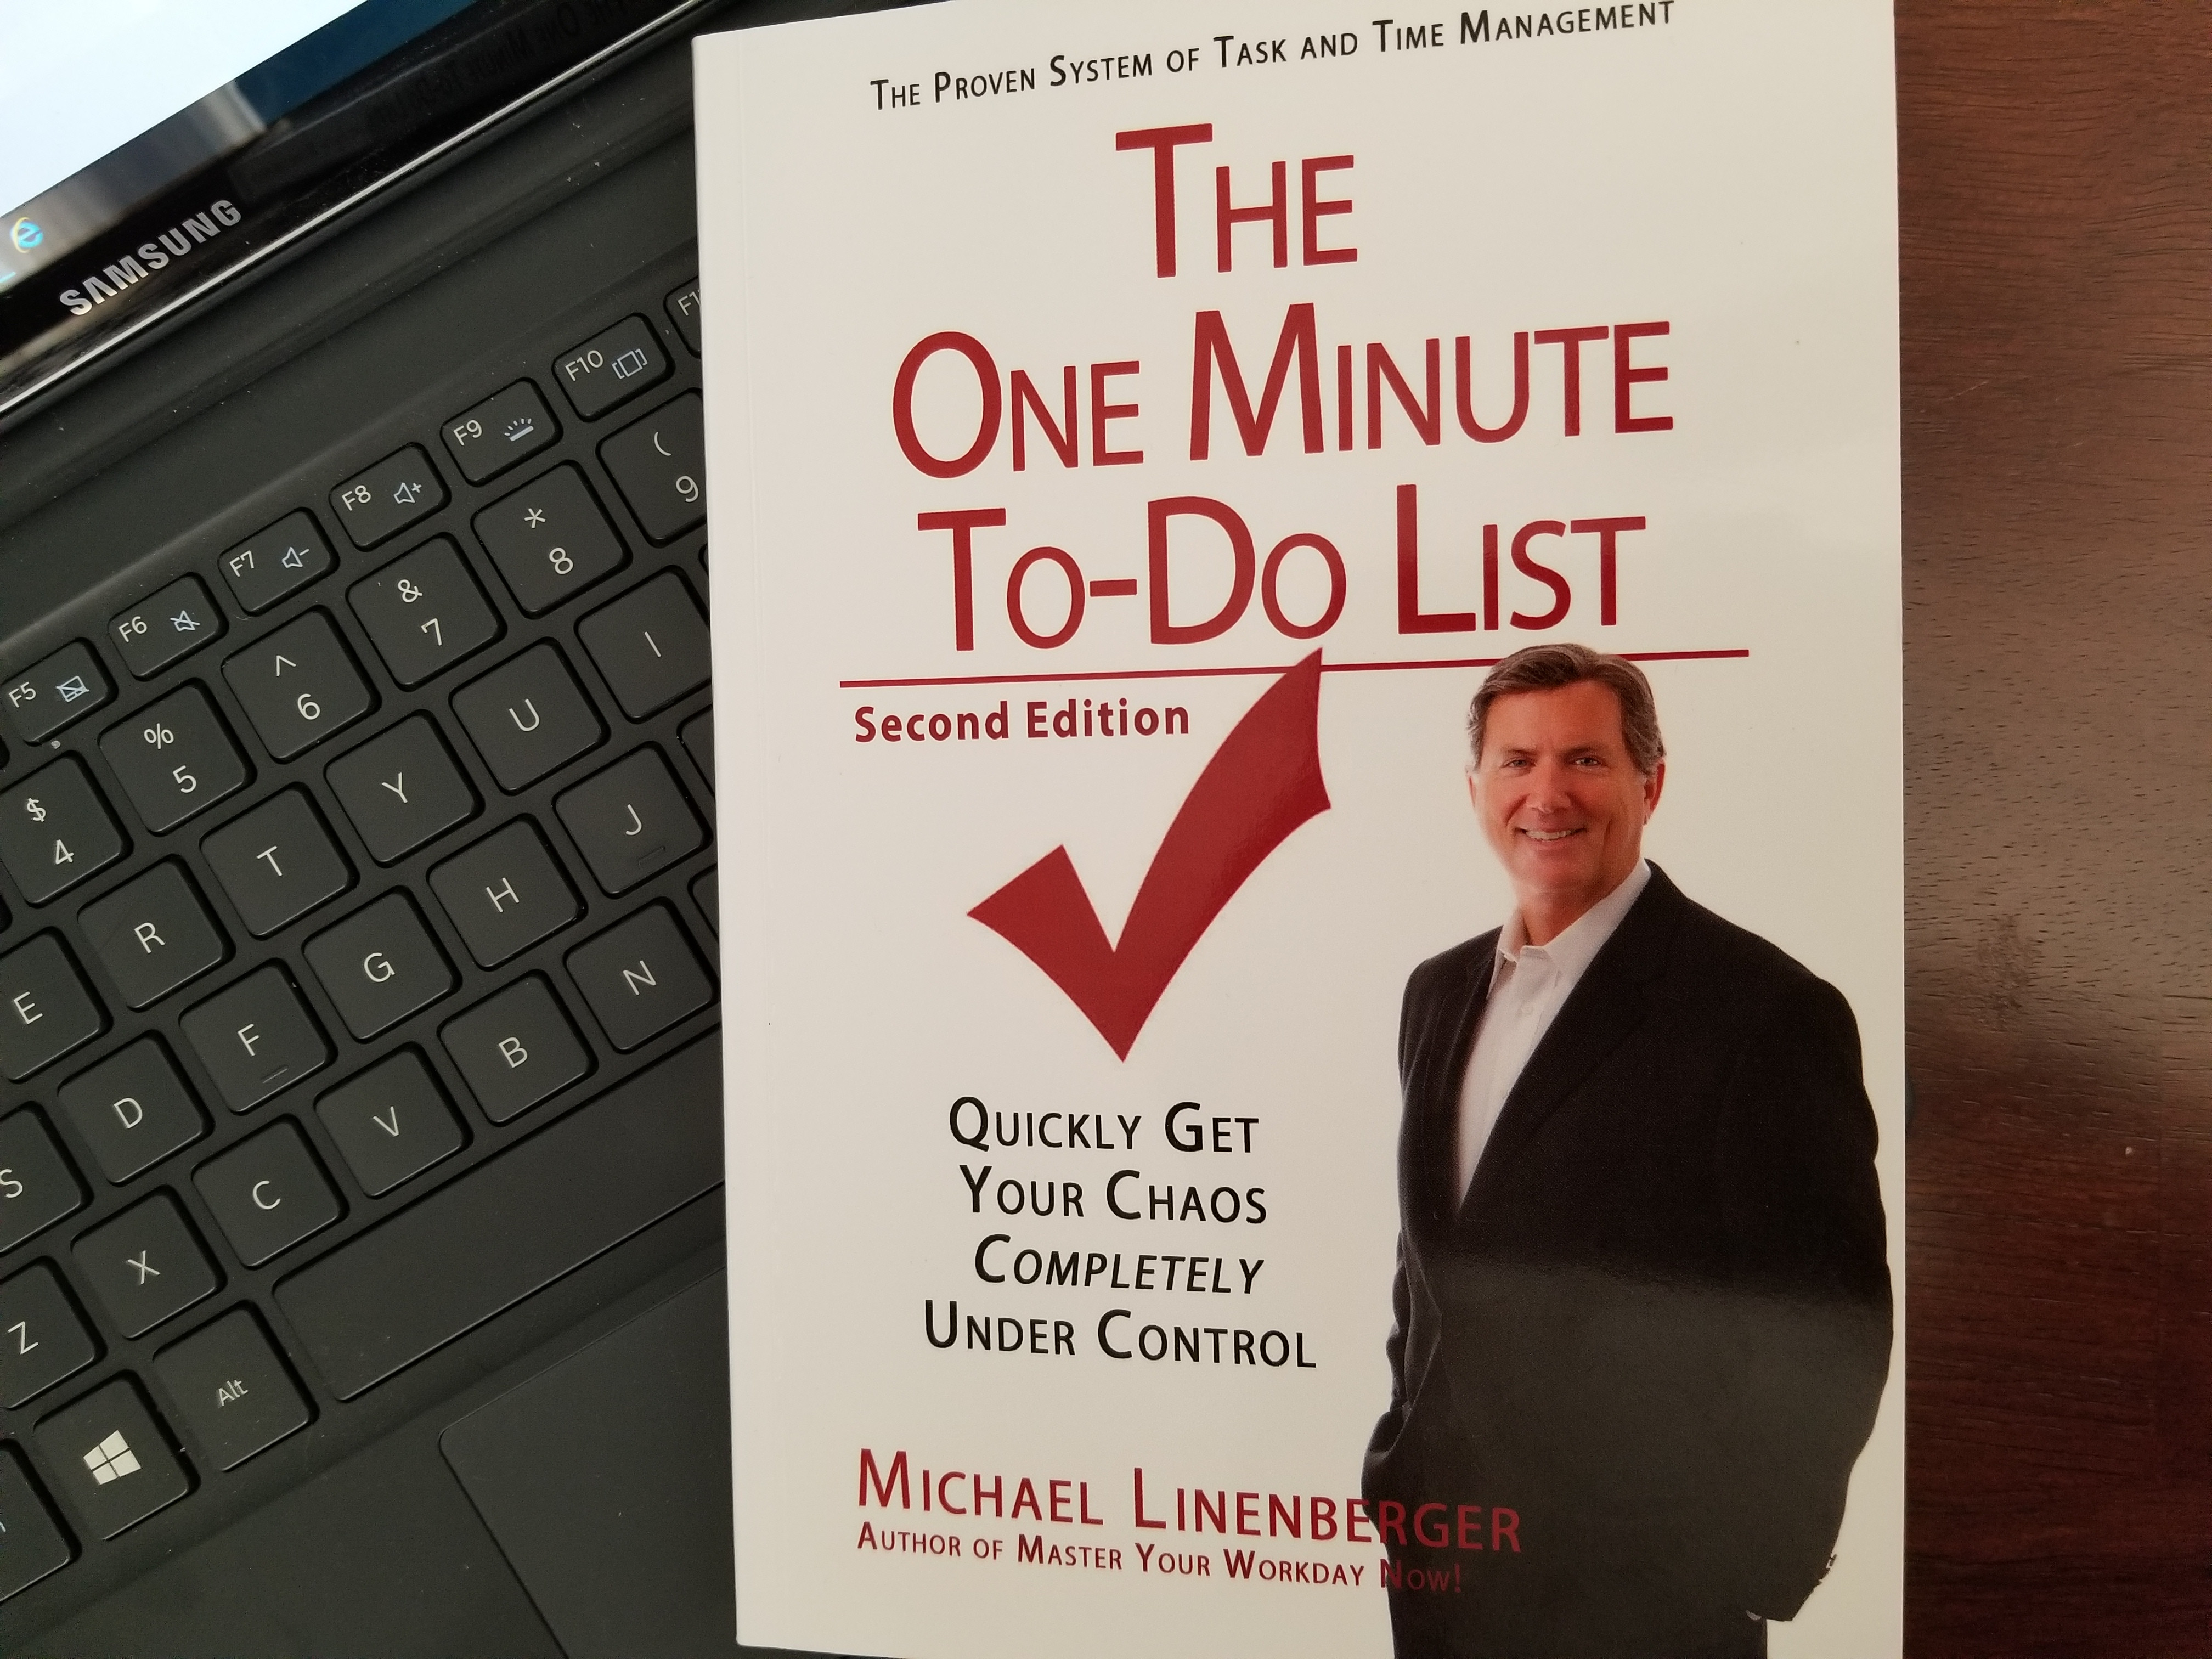 The One Minute To-Do List